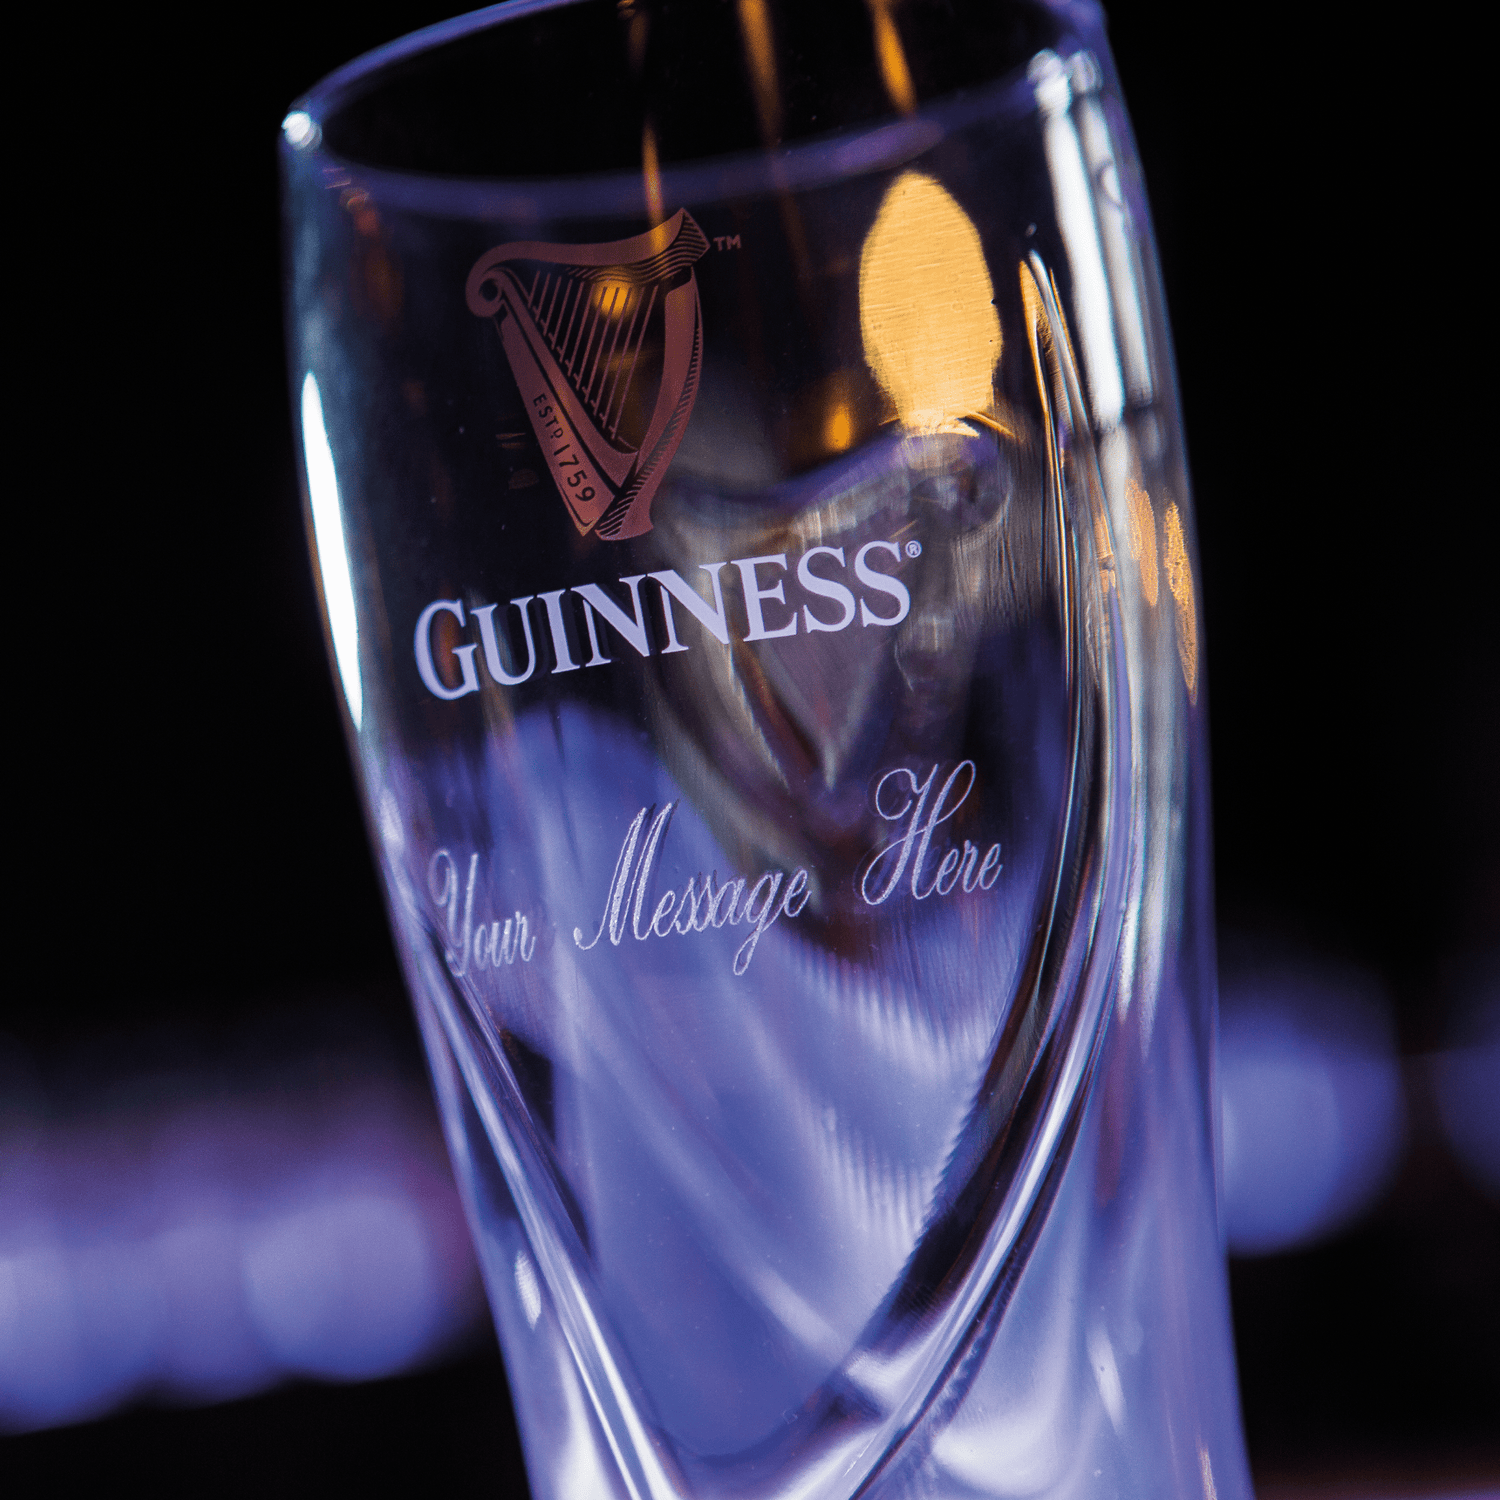 Get a custom engraved glass from Guinness